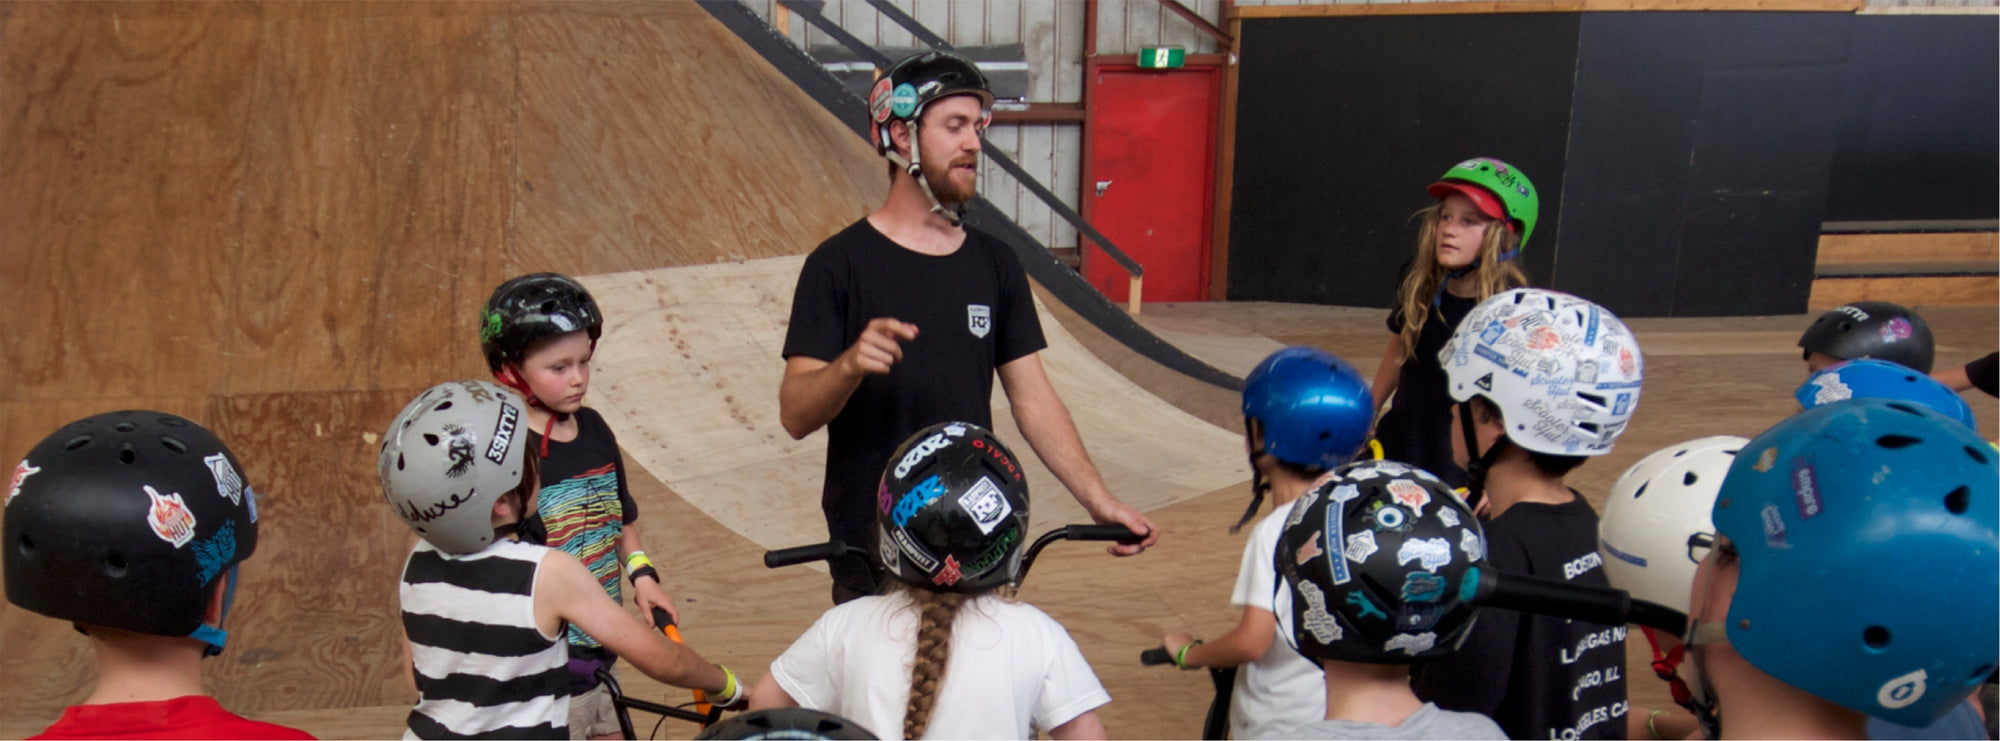 New Coaching Programs for Skate, Scooter & BMX!